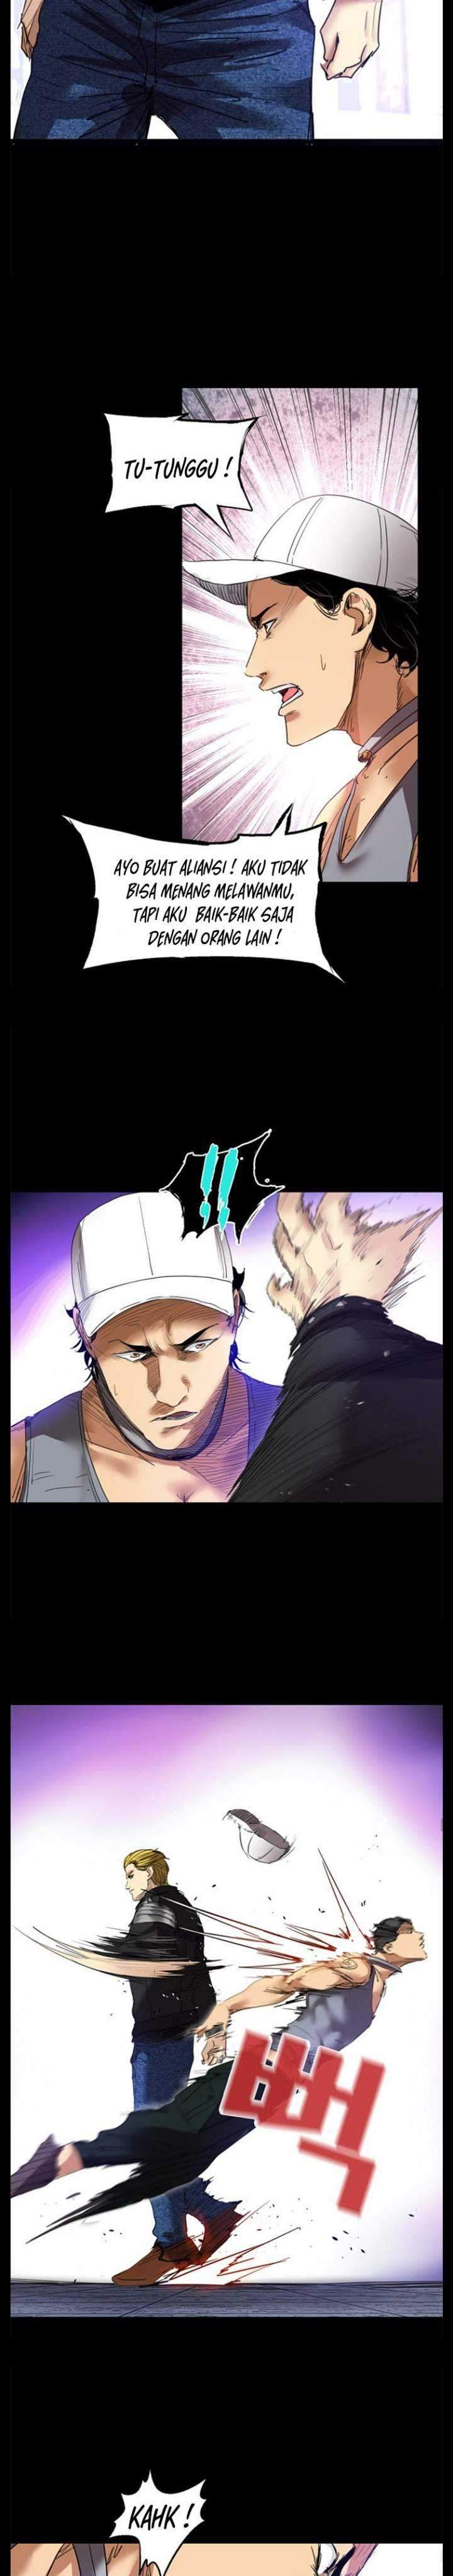 Fighters Chapter 46